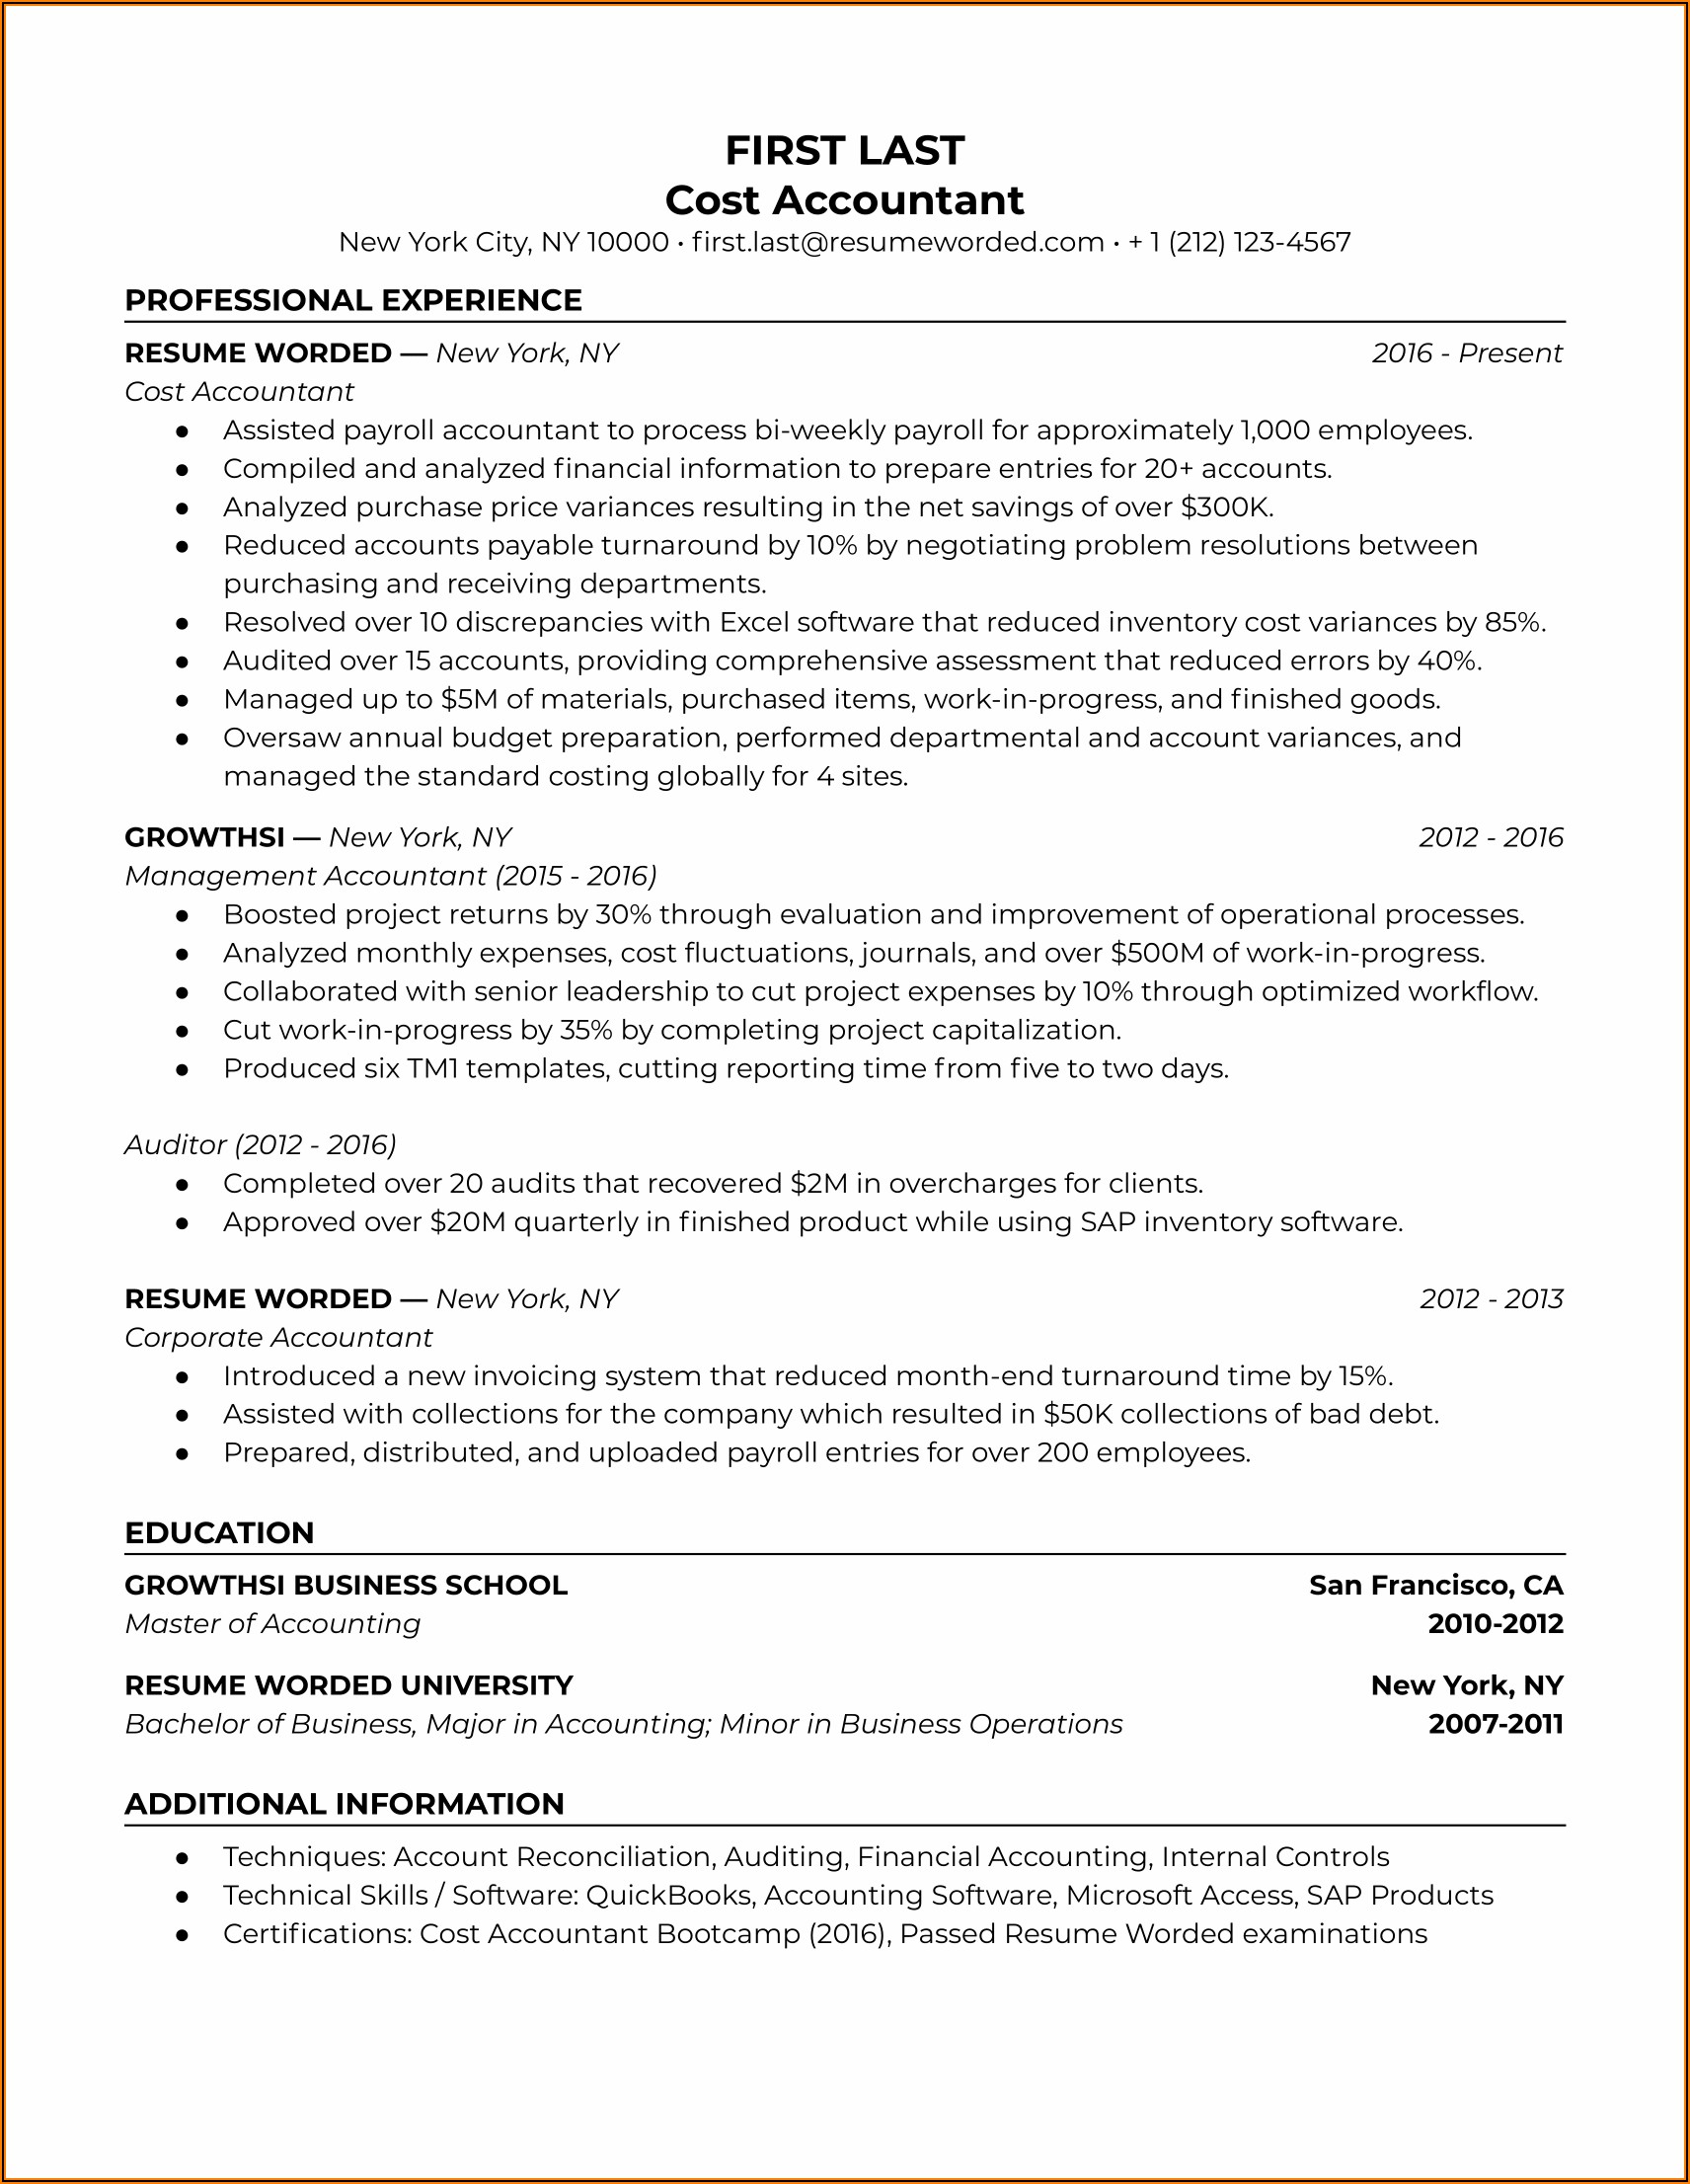 Senior Accountant Resume Format In Word Free Download In India